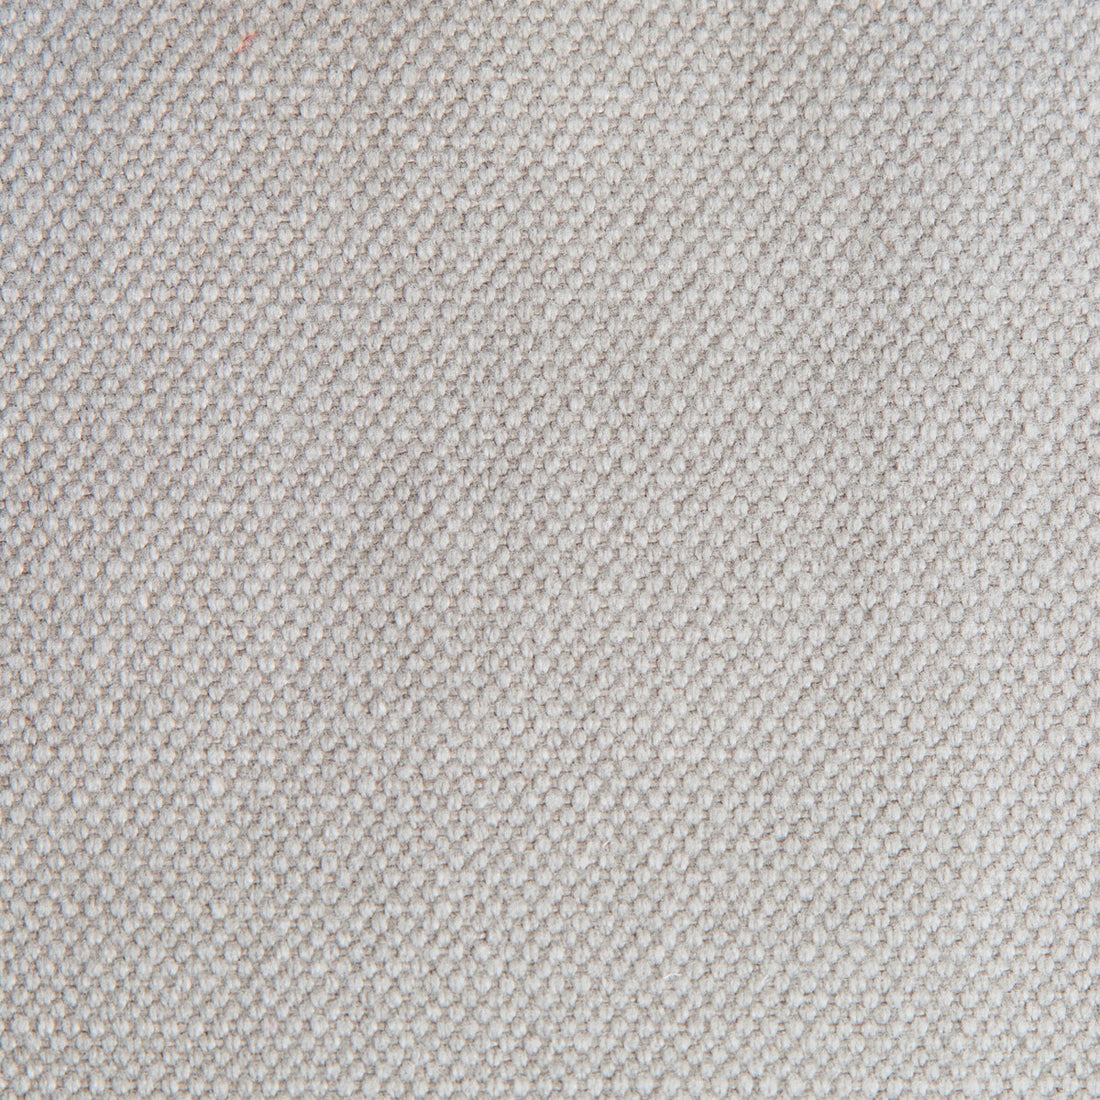 Lima fabric in gris color - pattern GDT5616.041.0 - by Gaston y Daniela in the Gaston Nuevo Mundo collection